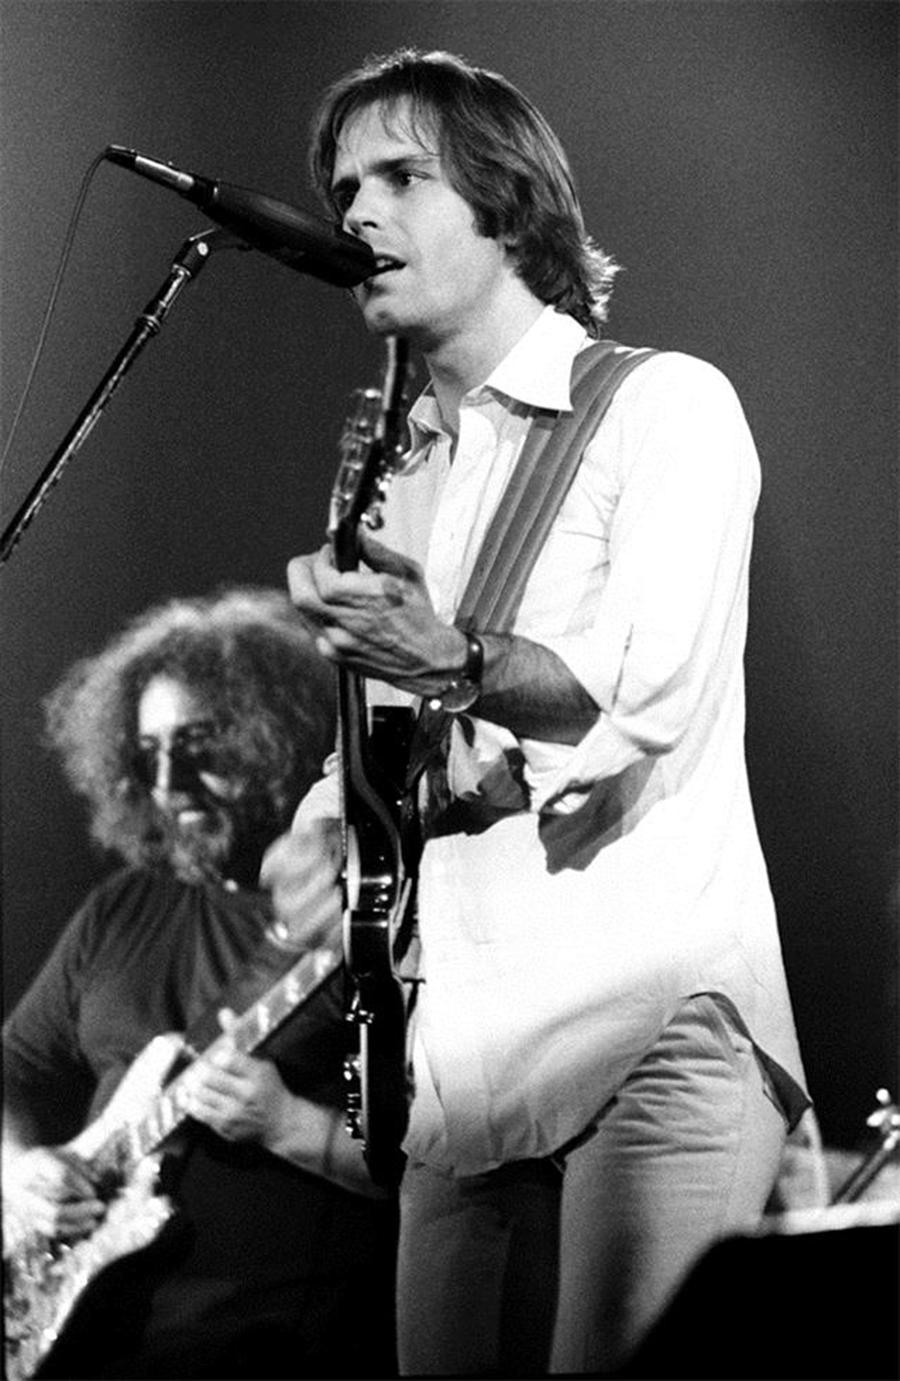 Patrick Harbron Black and White Photograph - Jerry Garcia & Bob Weir, The Grateful Dead